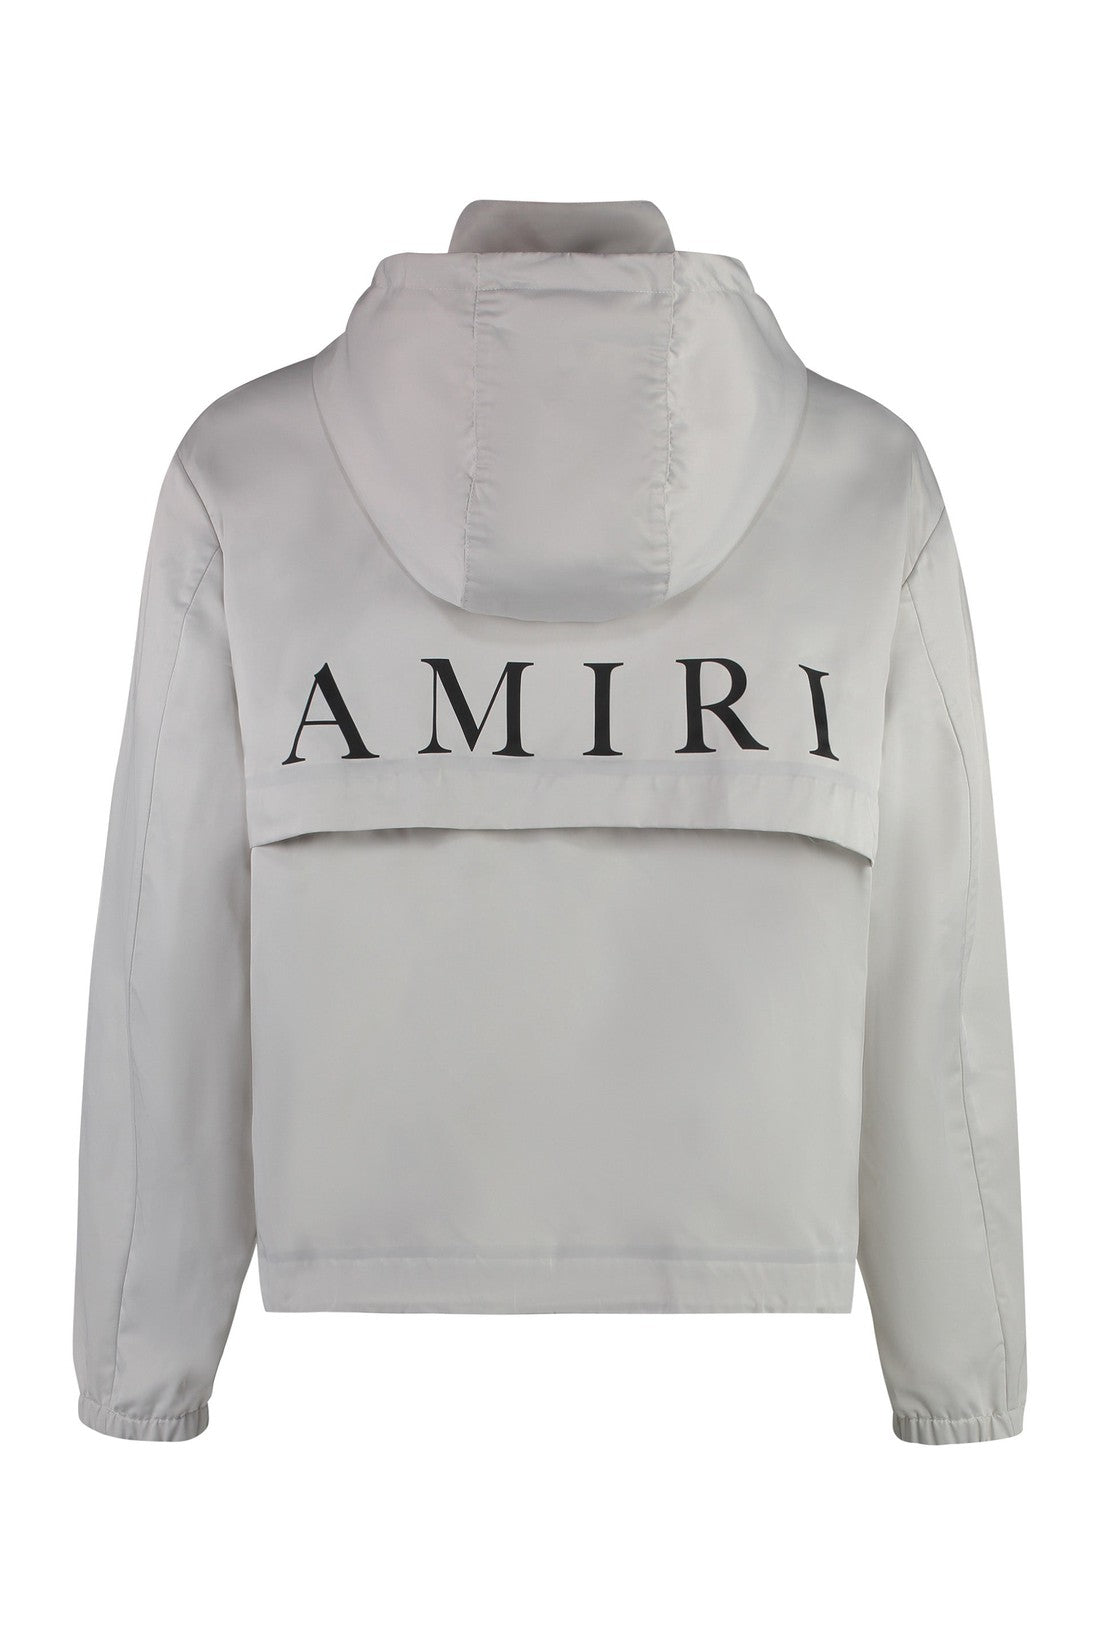 AMIRI-OUTLET-SALE-Technical fabric hooded jacket-ARCHIVIST